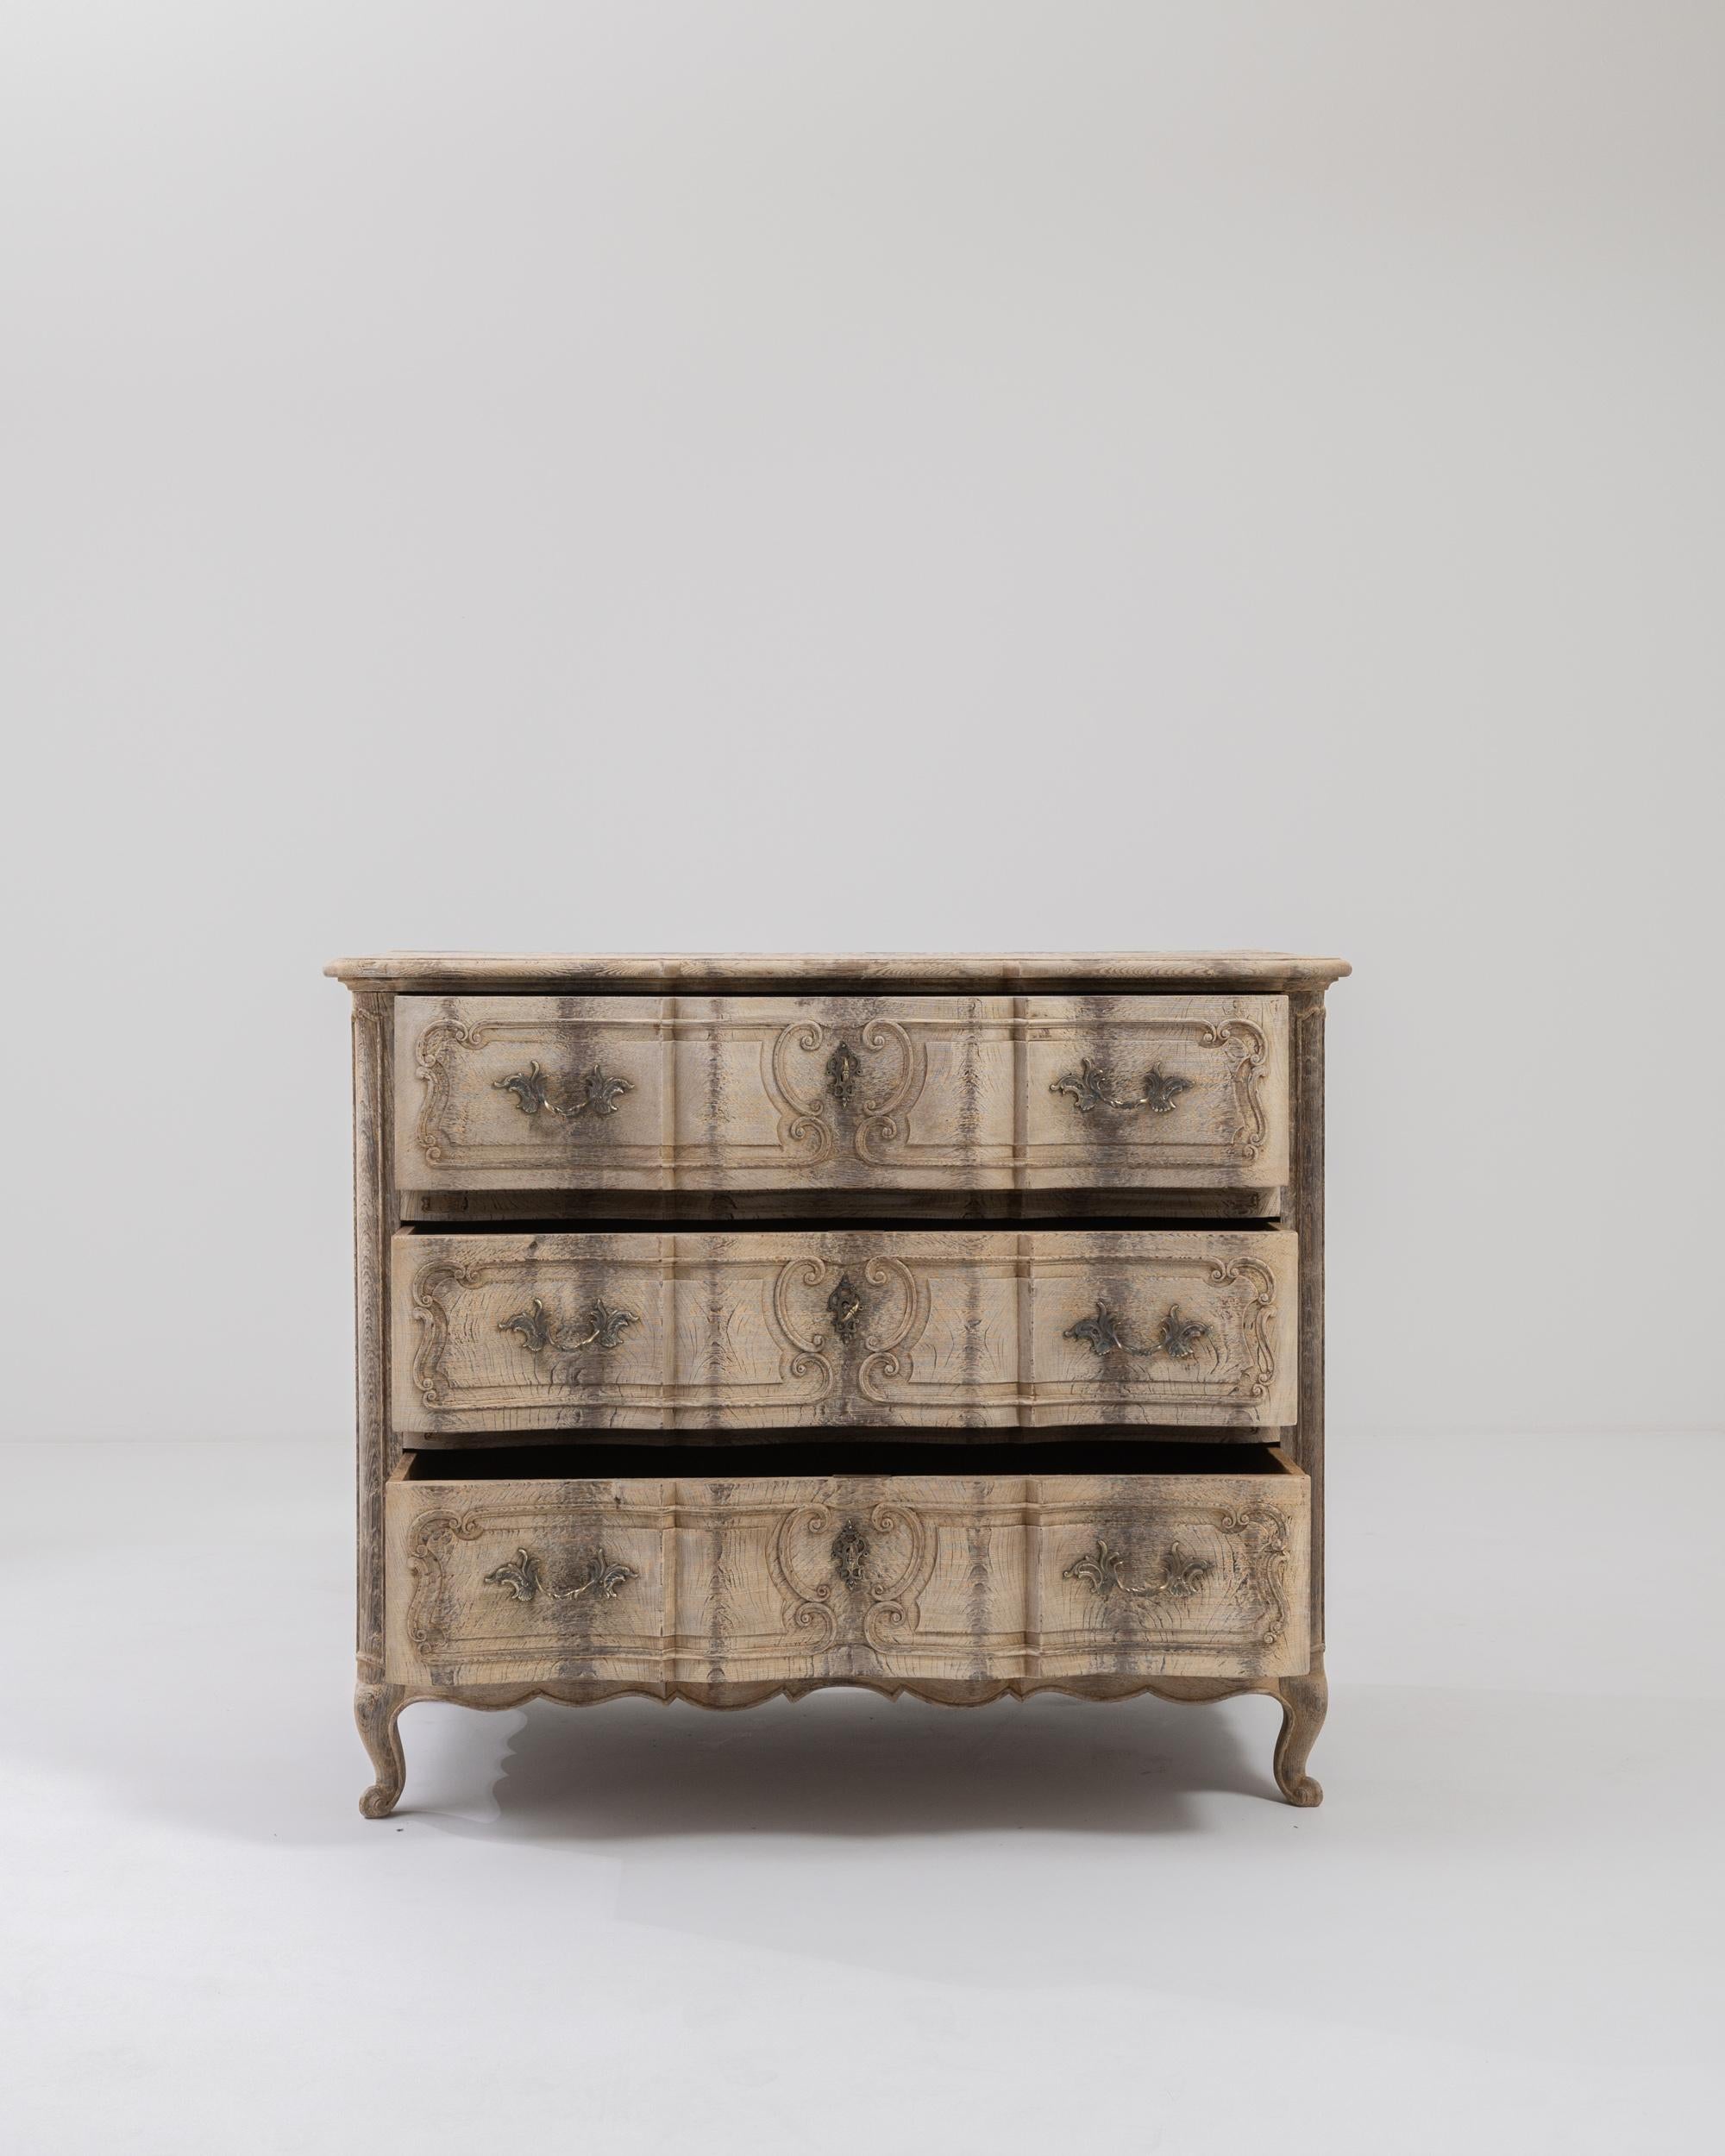 Step into the refined elegance of the 19th Century French Bleached Oak Chest of Drawers, a masterpiece in the exquisite style of Louis XV. This enchanting piece features three drawers adorned with lavish ornate details, showcasing the meticulous